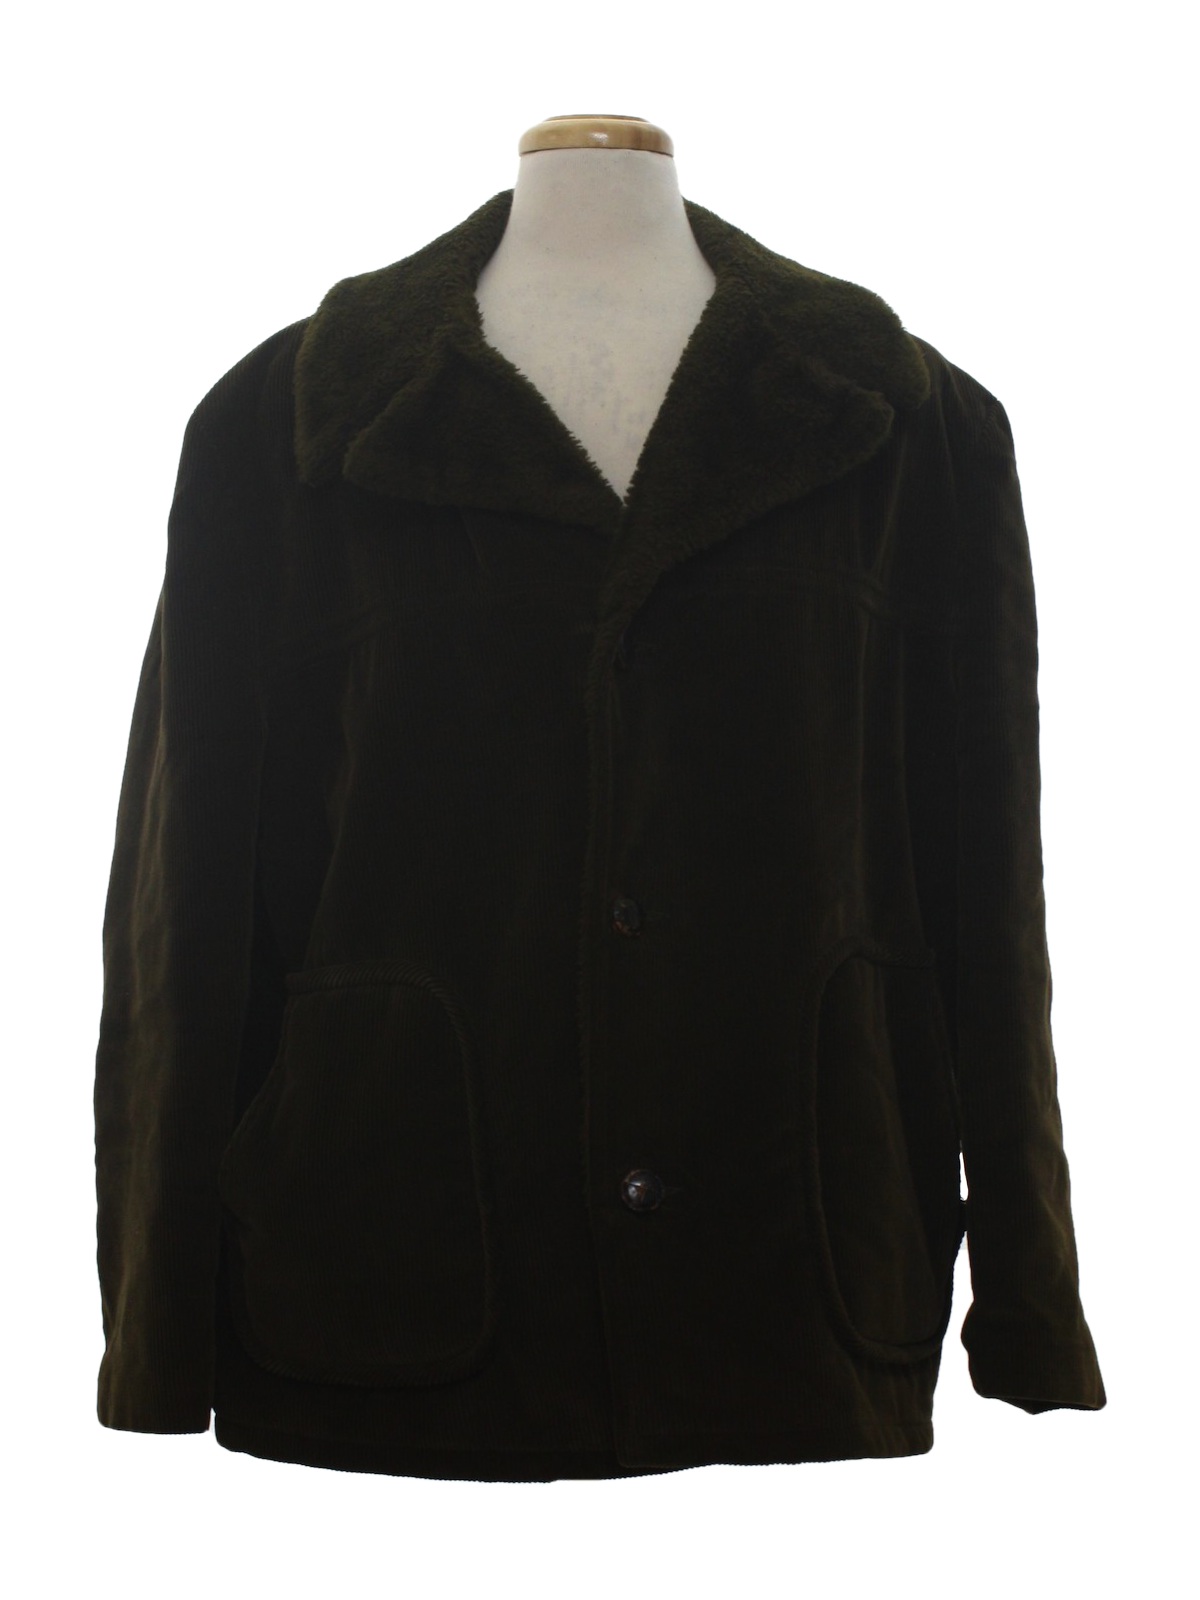 1960's Jacket (Towncraft): Late 60s -Towncraft- Mens dark olive green ...